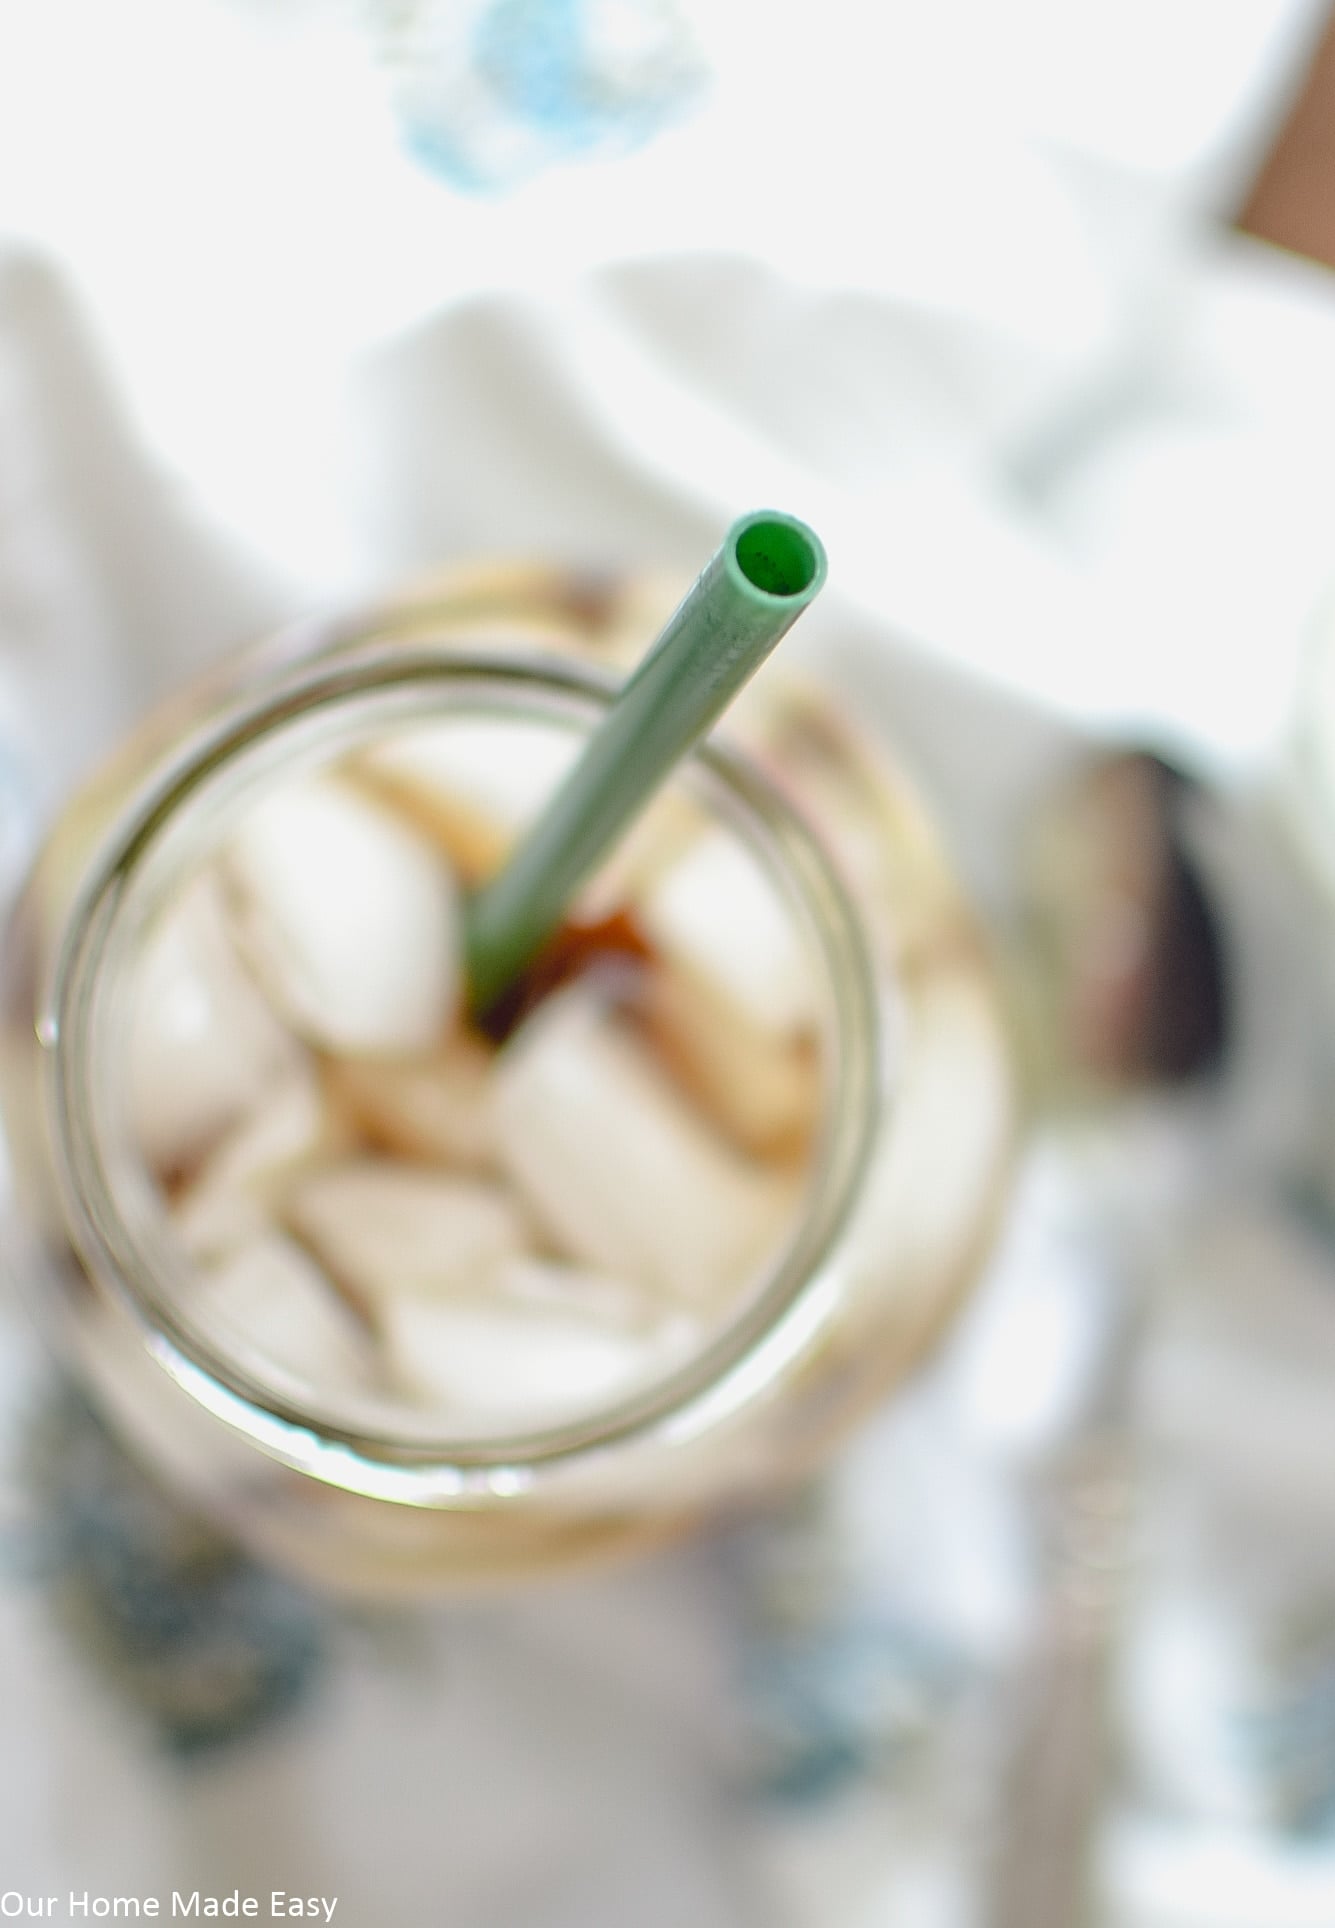 Start making your own iced coffee at home with this cold brew coffee recipe